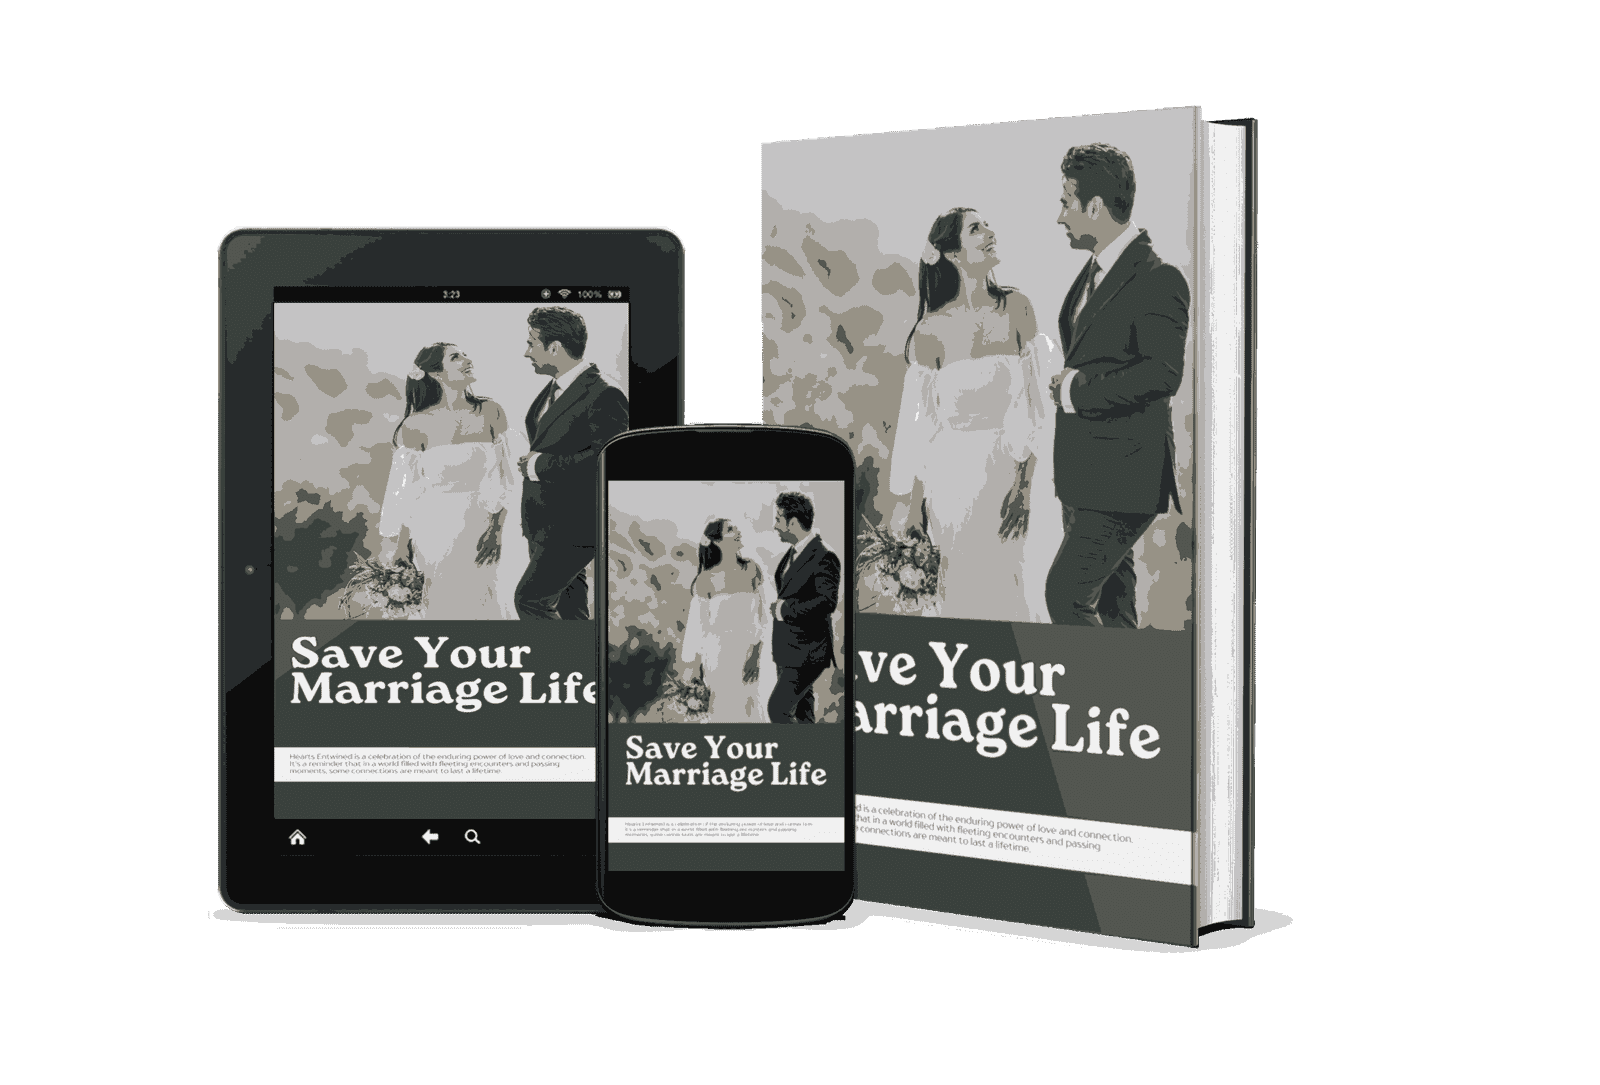 Save Your Marriage Life